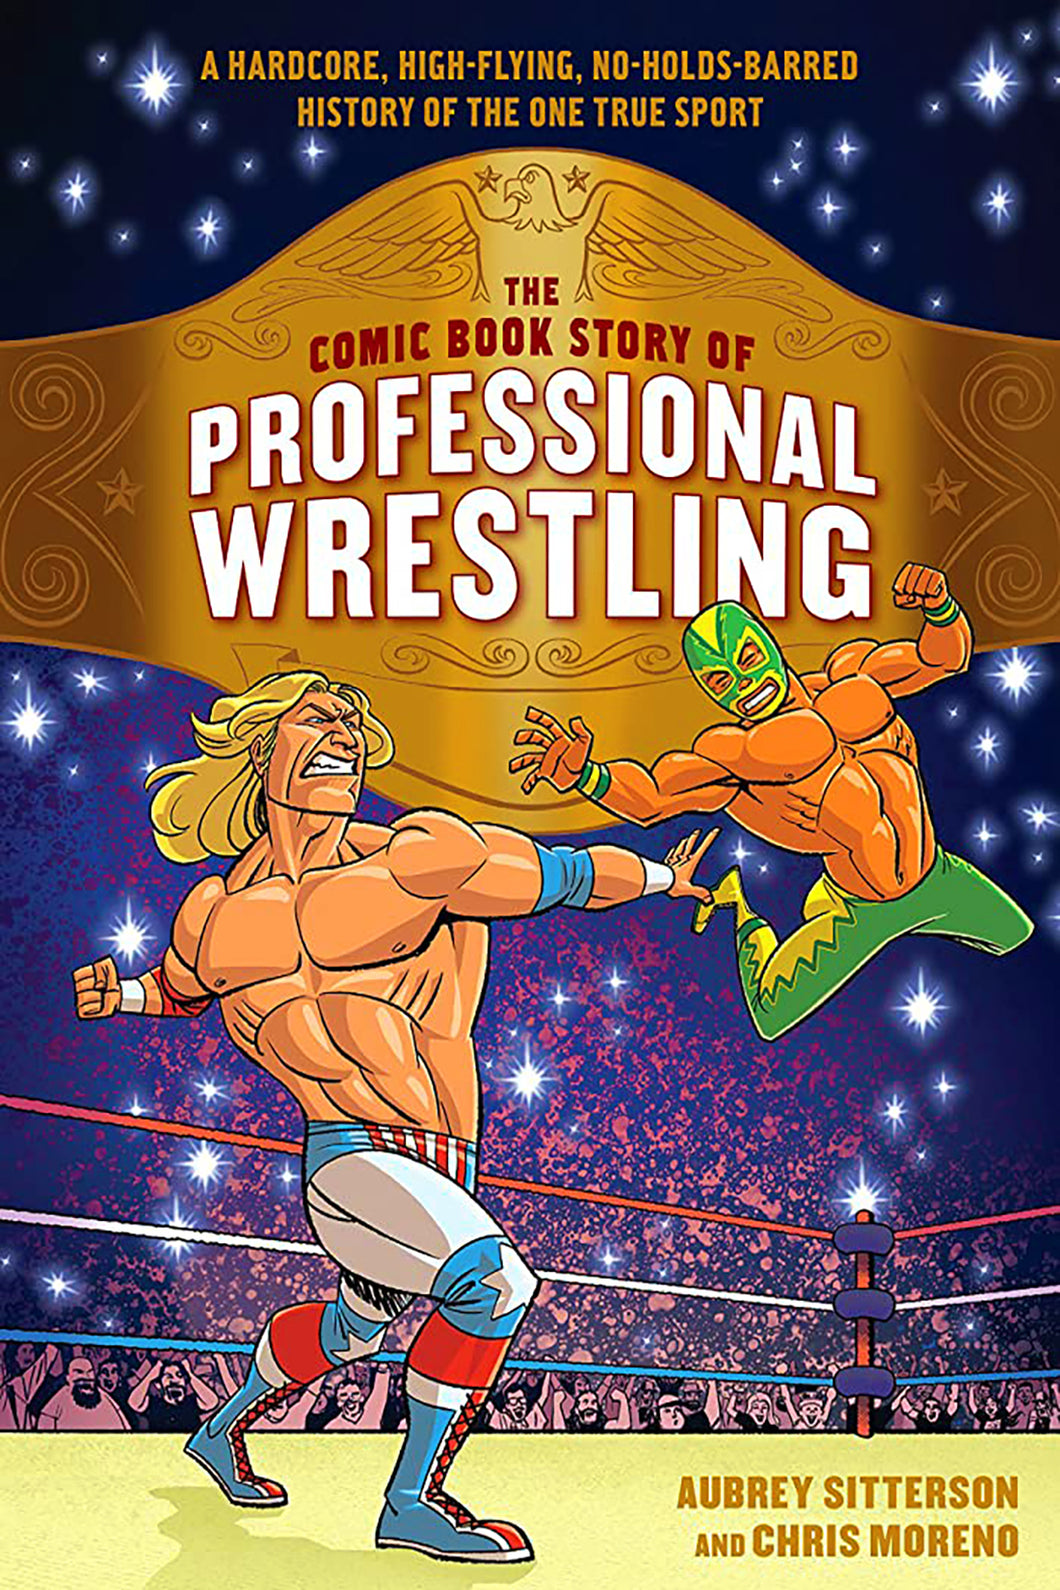 The Comic Book Story of Professional Wrestling: A Hardcore, High-Flying, No-Holds-Barred History of the One True Sport by Chris Moreno and Aubrey Sitterson / Paperback - NEW BOOK